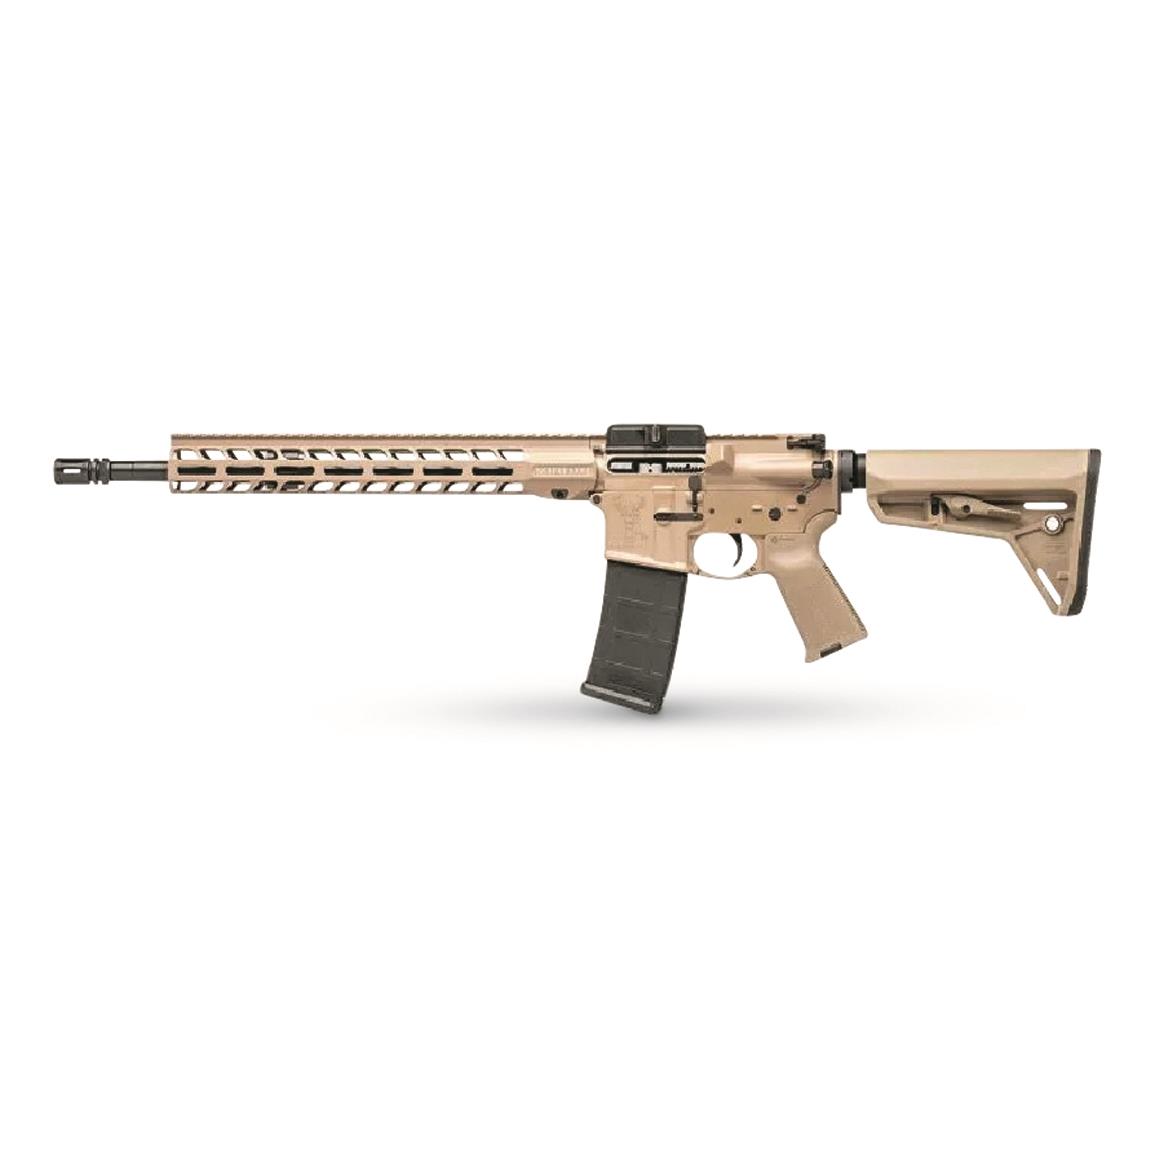 Stag Arms Stag-15 Tactical AR-15, Semi-auto, 5.56 NATO/.223 Rem., 16" Barrel, Left Handed, 30+1 Rds.